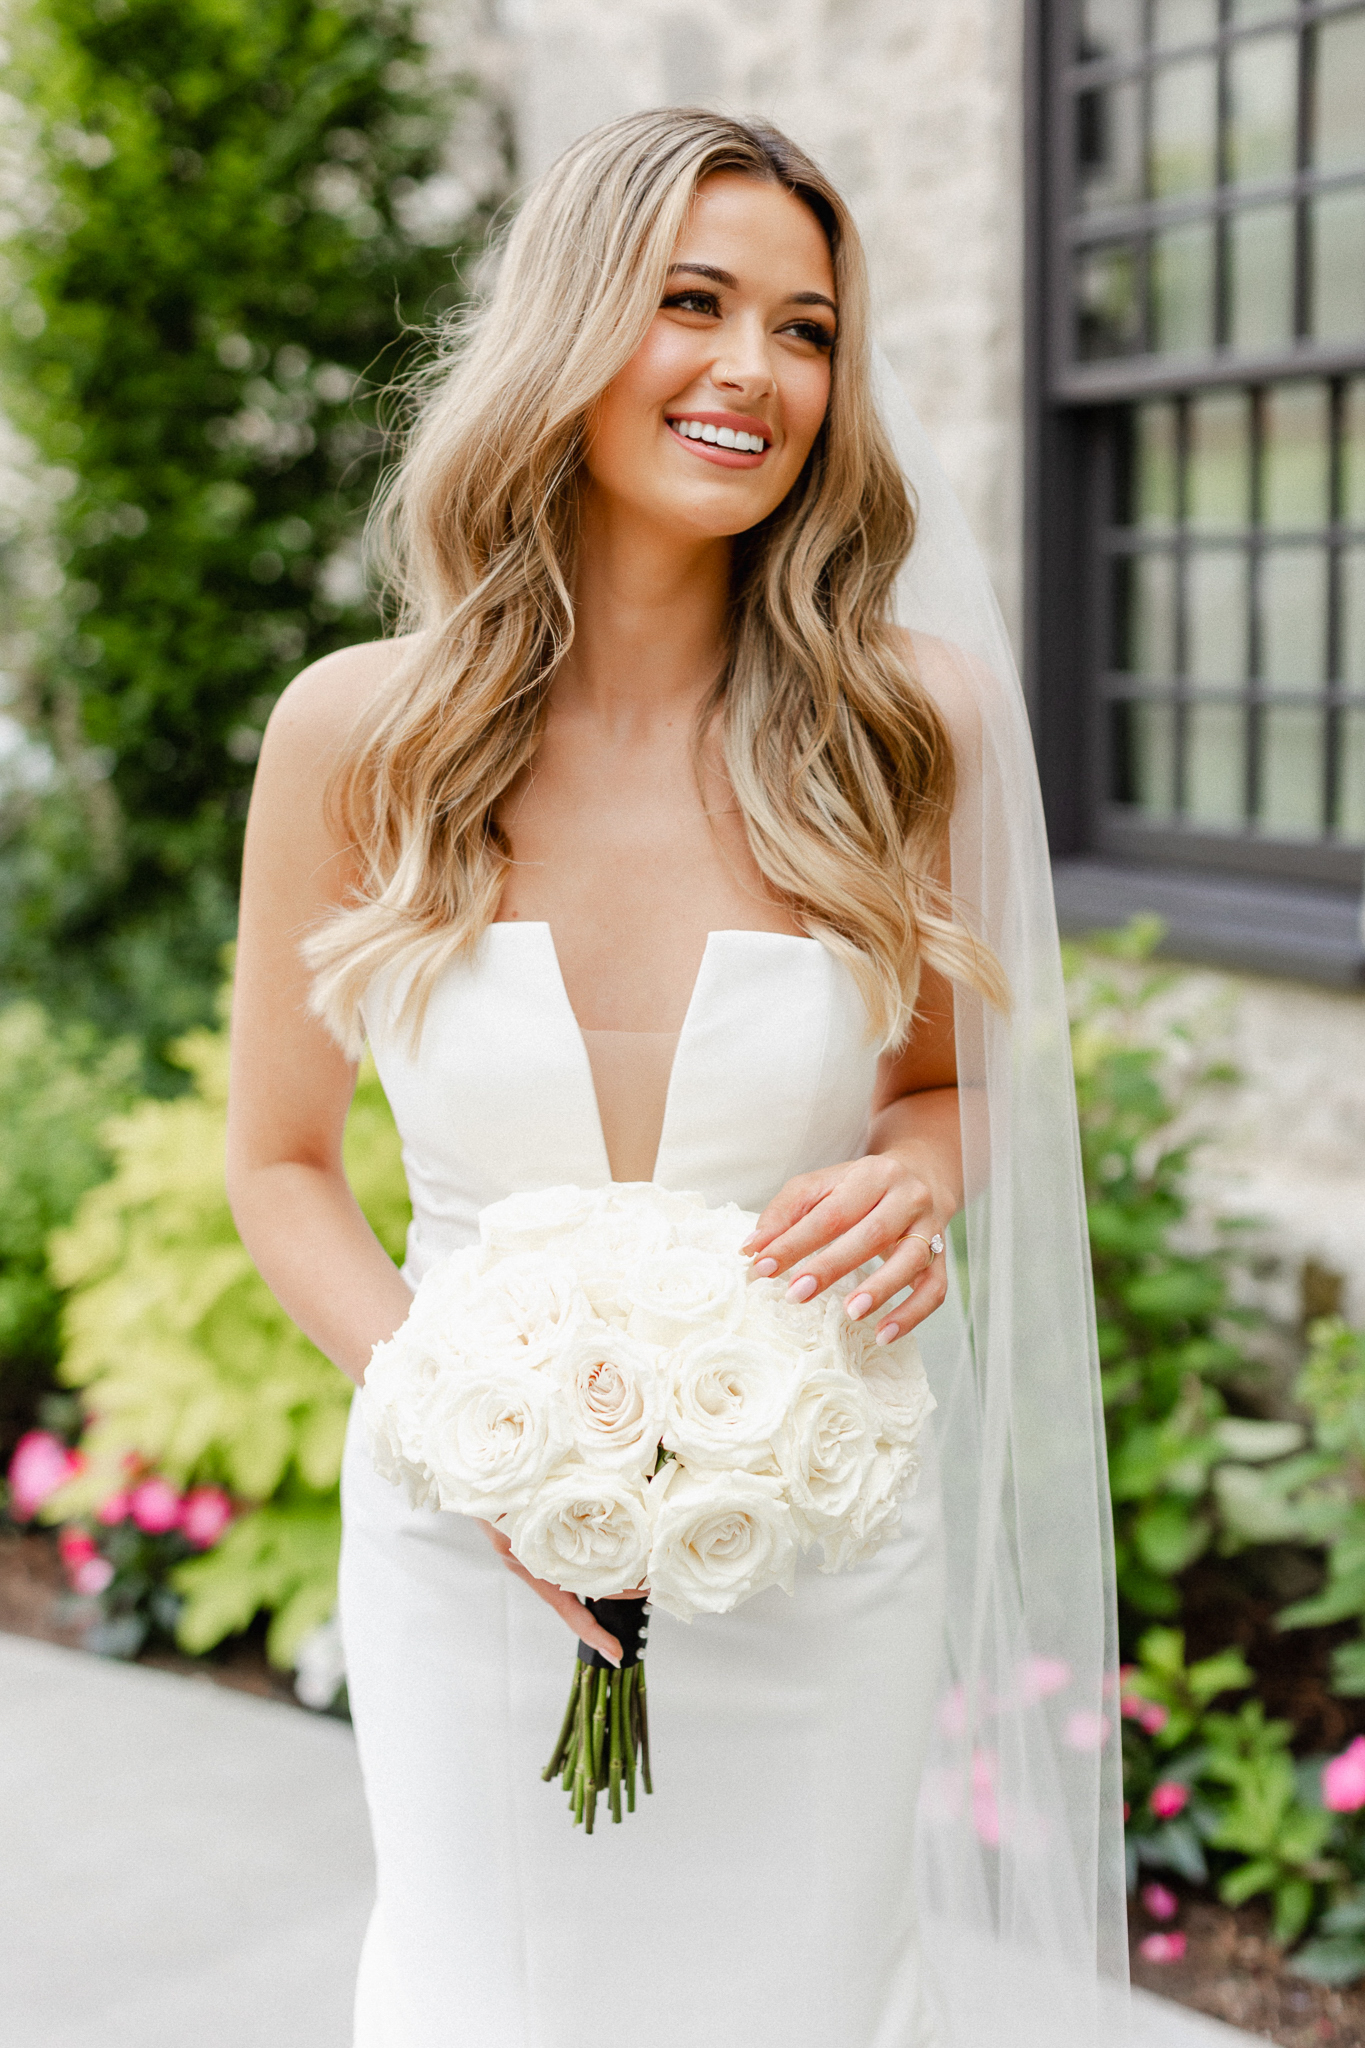 A stunning bride, elegantly dressed in white, gracefully holds a bouquet and touches it, showcasing her wedding ring while laughing